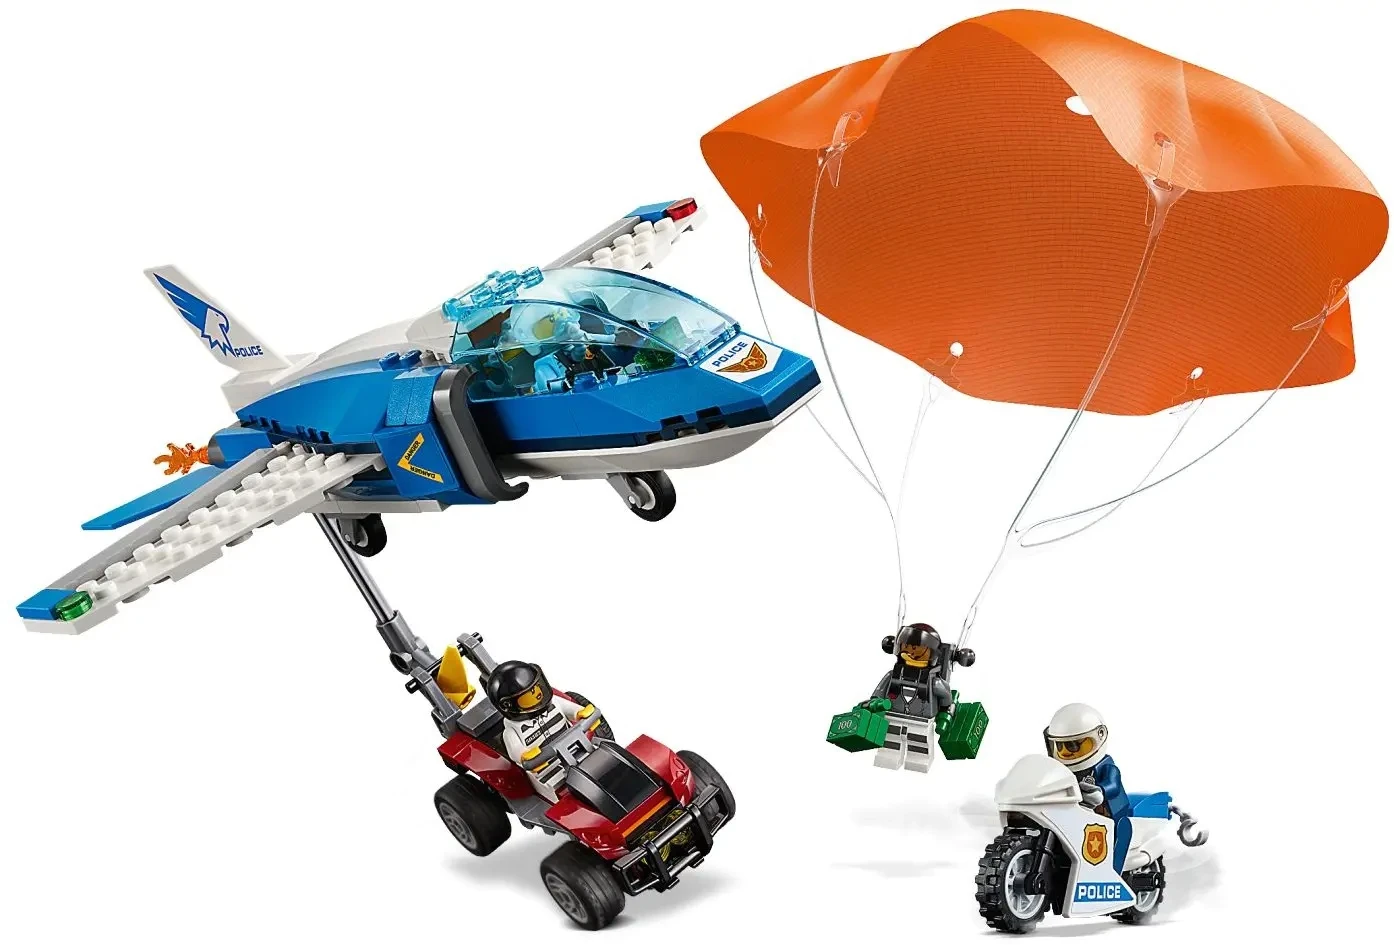 

New City Series Brick Sky Police Parachute Arrest Compatible with 60208 Building Blocks Toys for Children Birthday New Year Gift